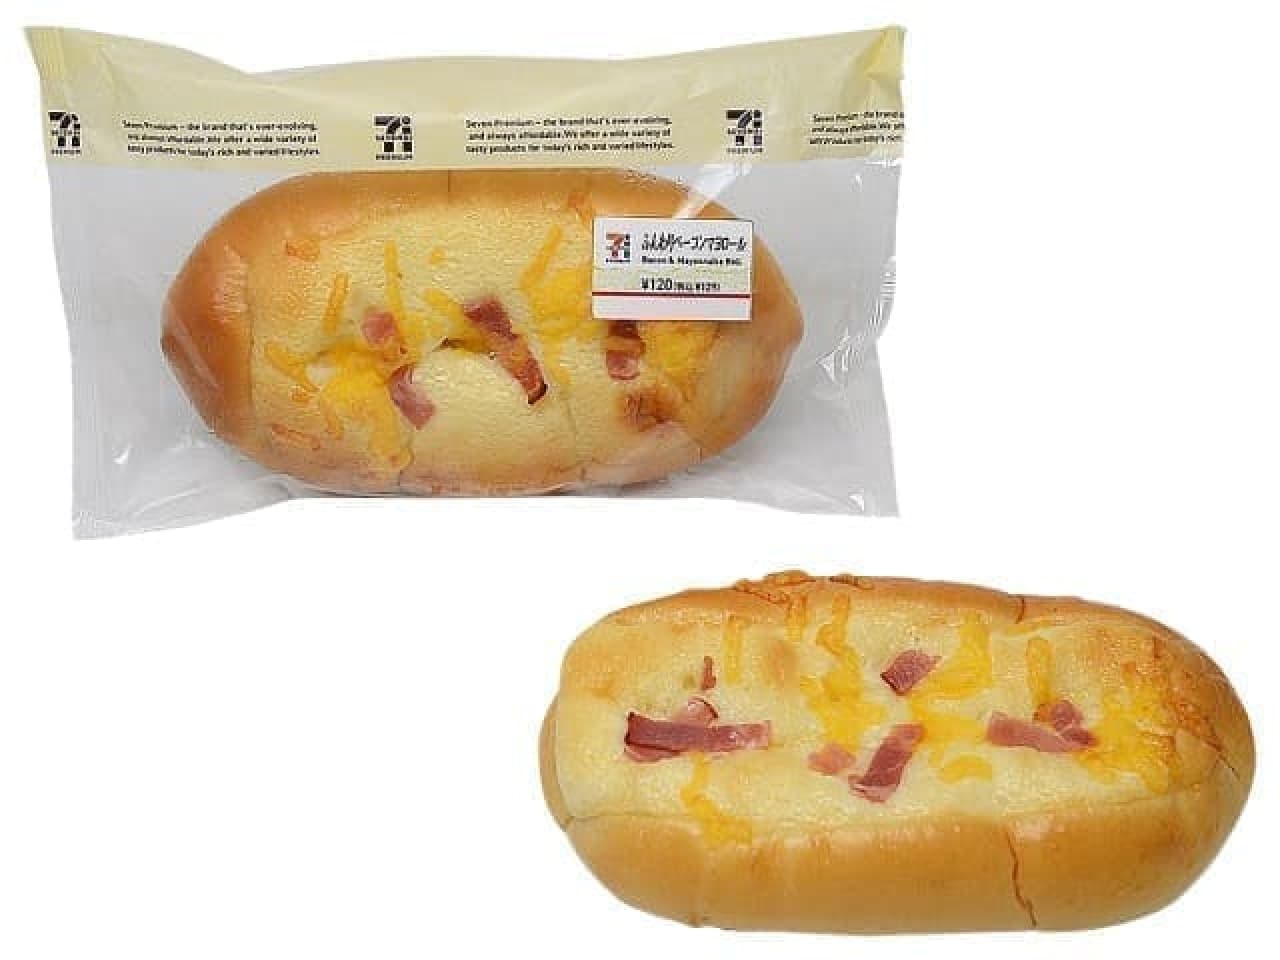 7-ELEVEN's "Fluffy Bacon Mayonnaise"